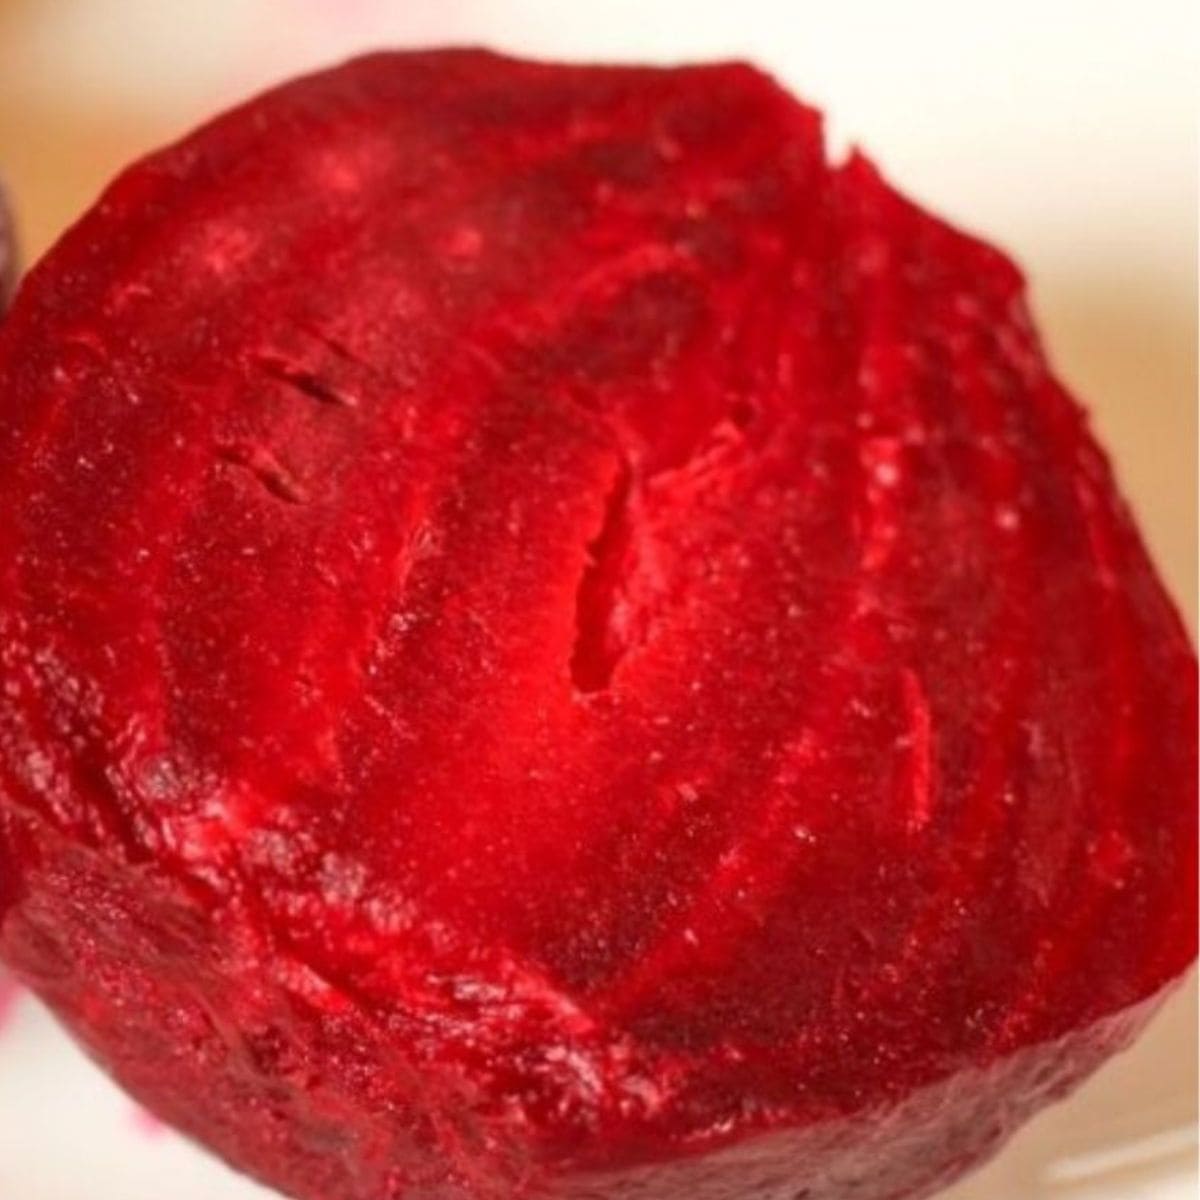 Microwave cooked whole red beet cut in half.